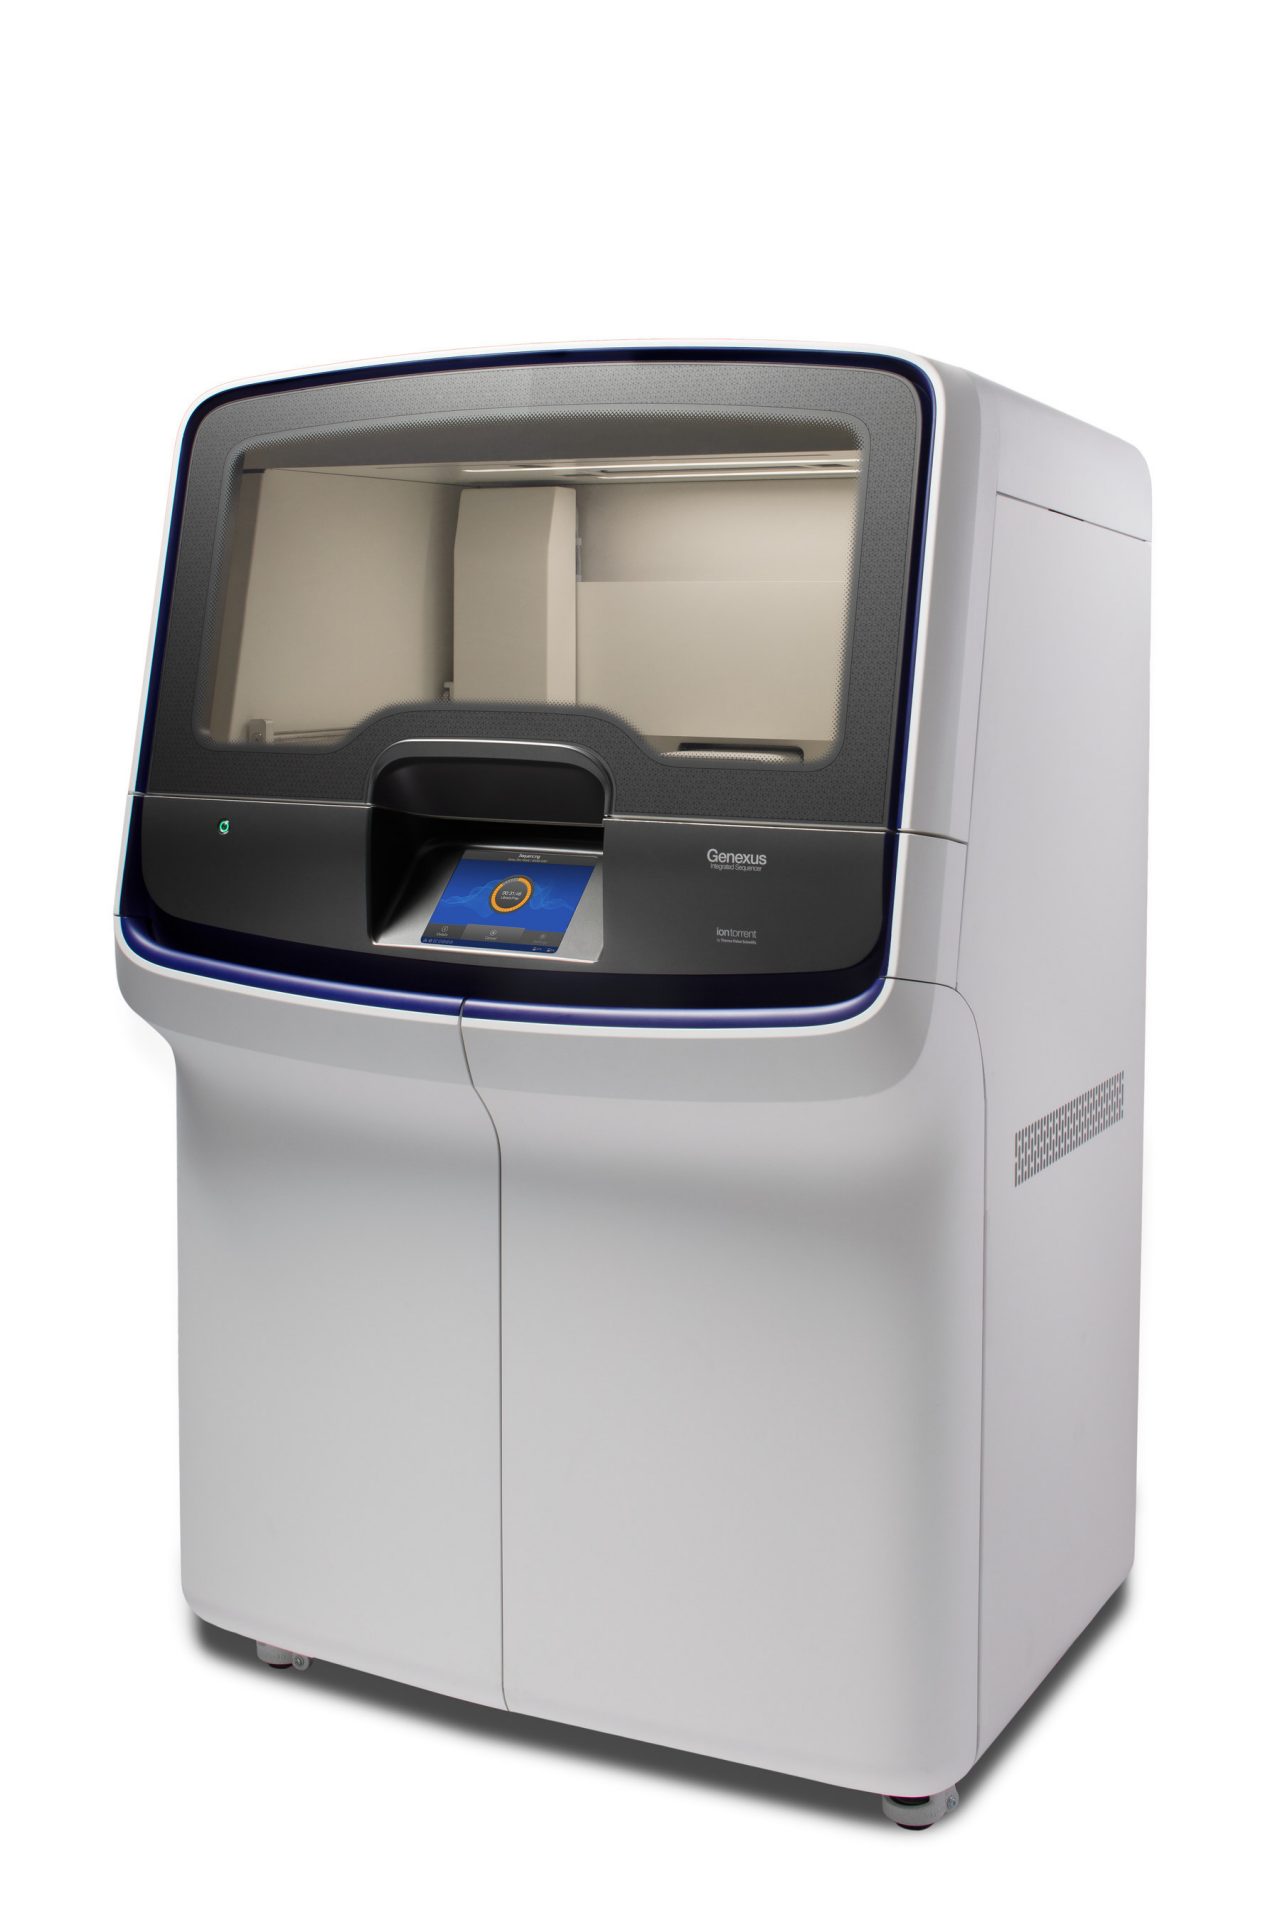 The Genexus System features unprecedented speed and automation to deliver next-generation sequencing results in one day.